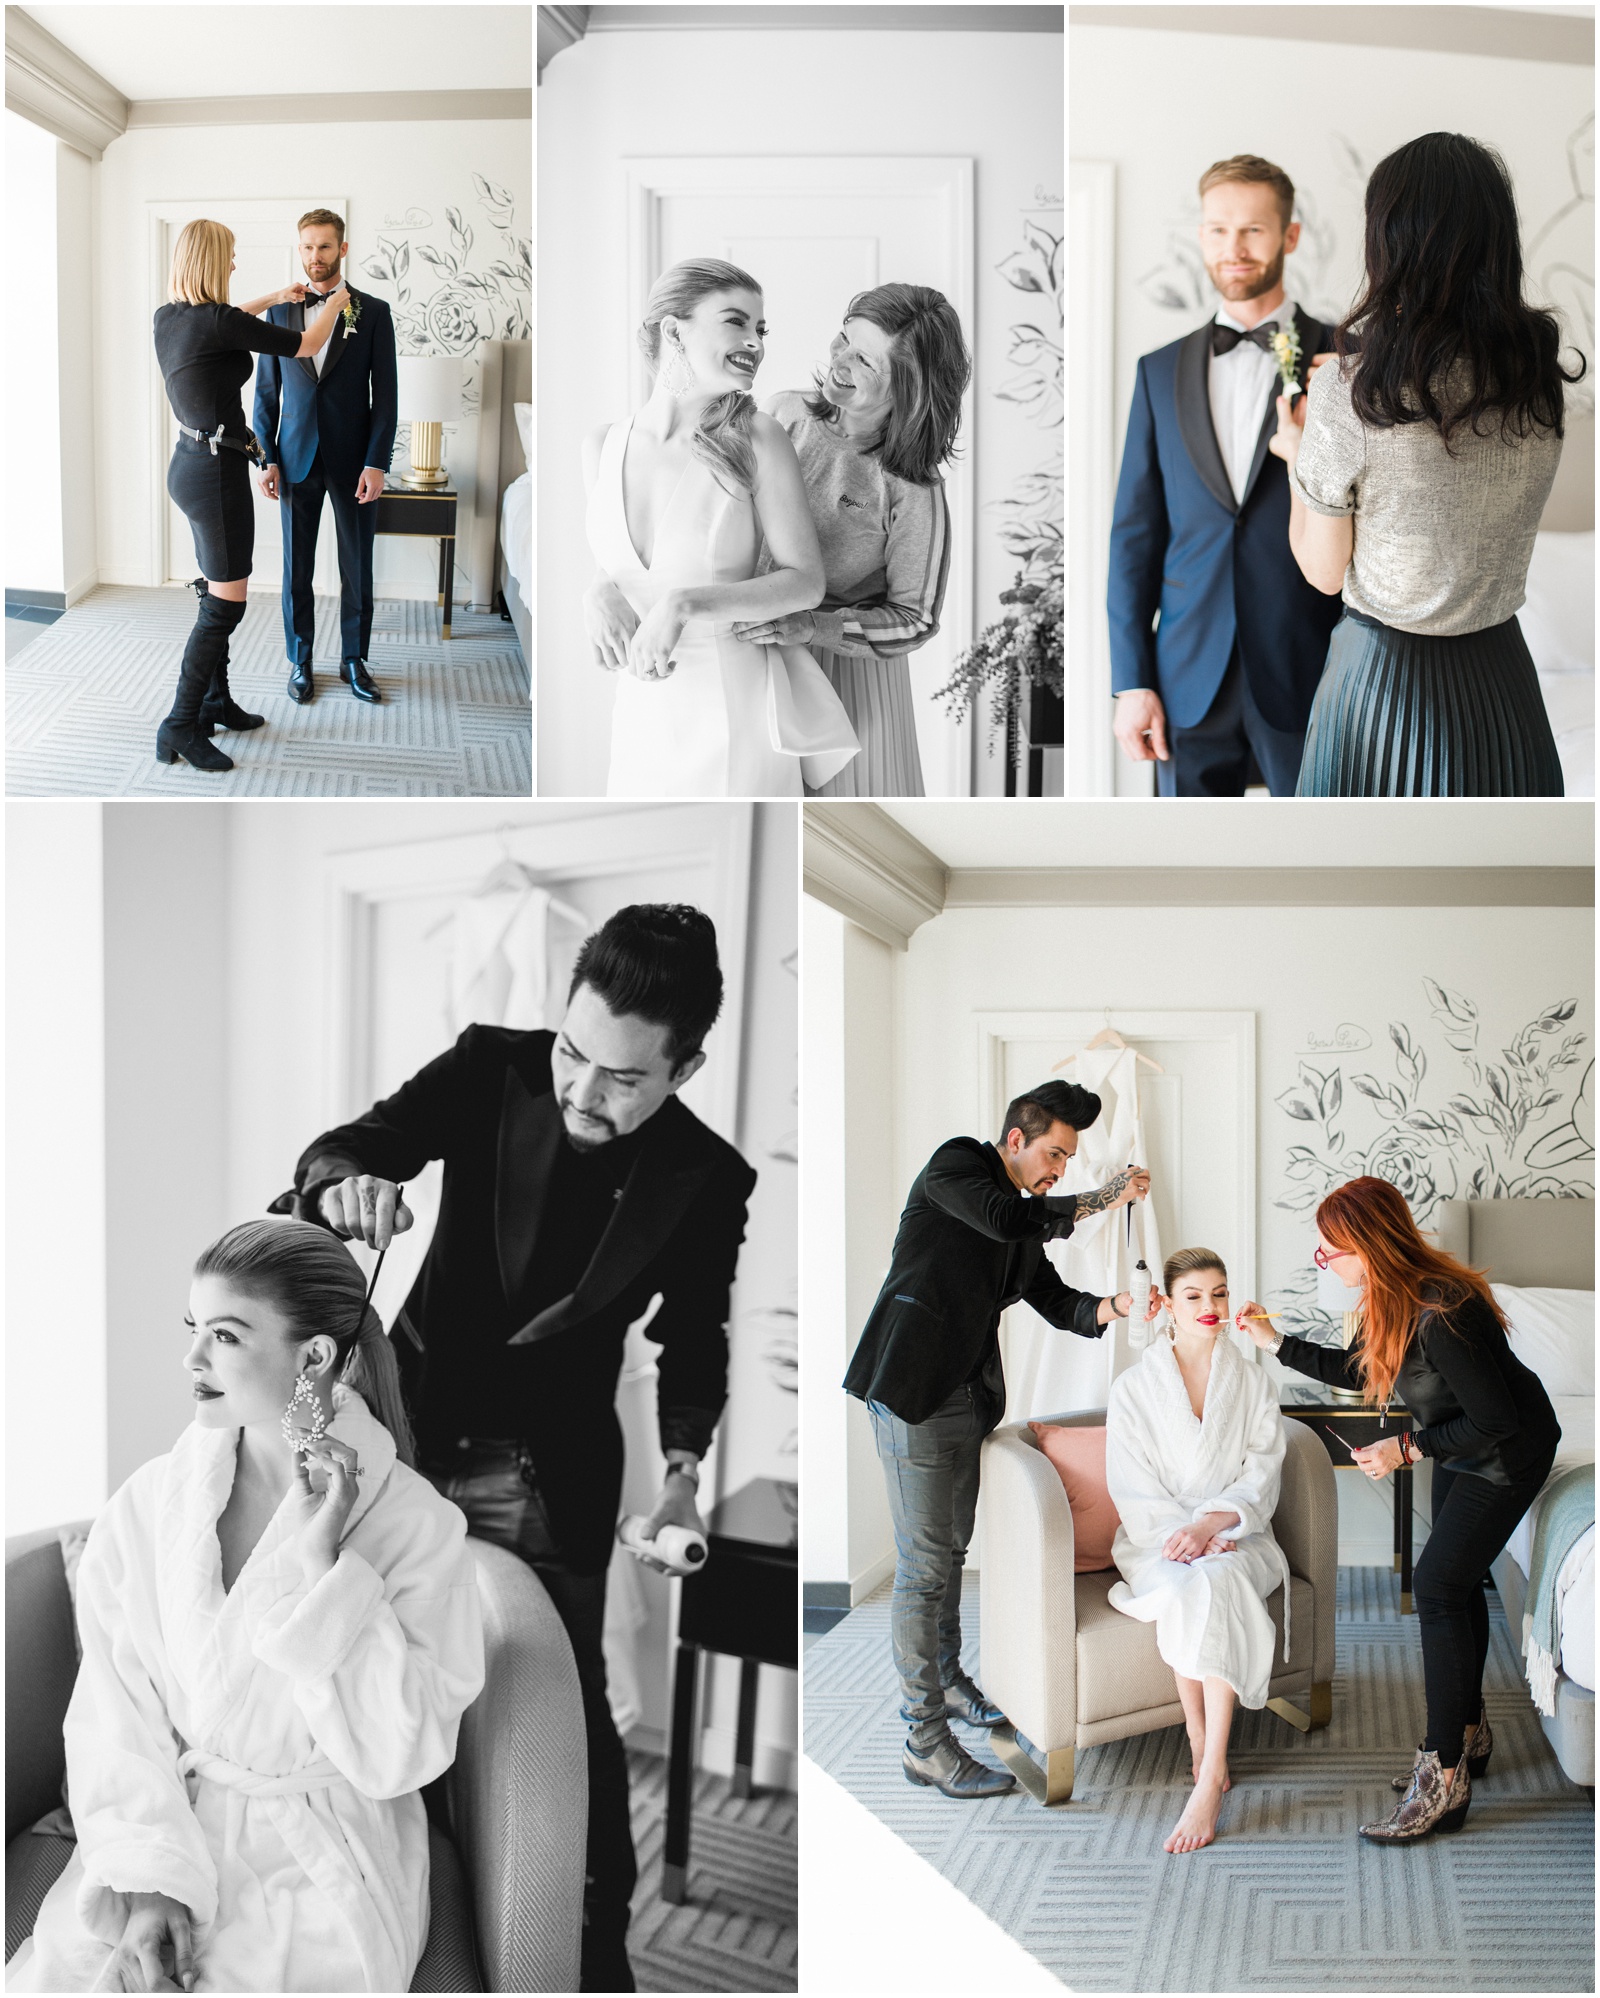 best chicago wedding vendors debi lilly, styled by ariana, aga rhodes and juan jose